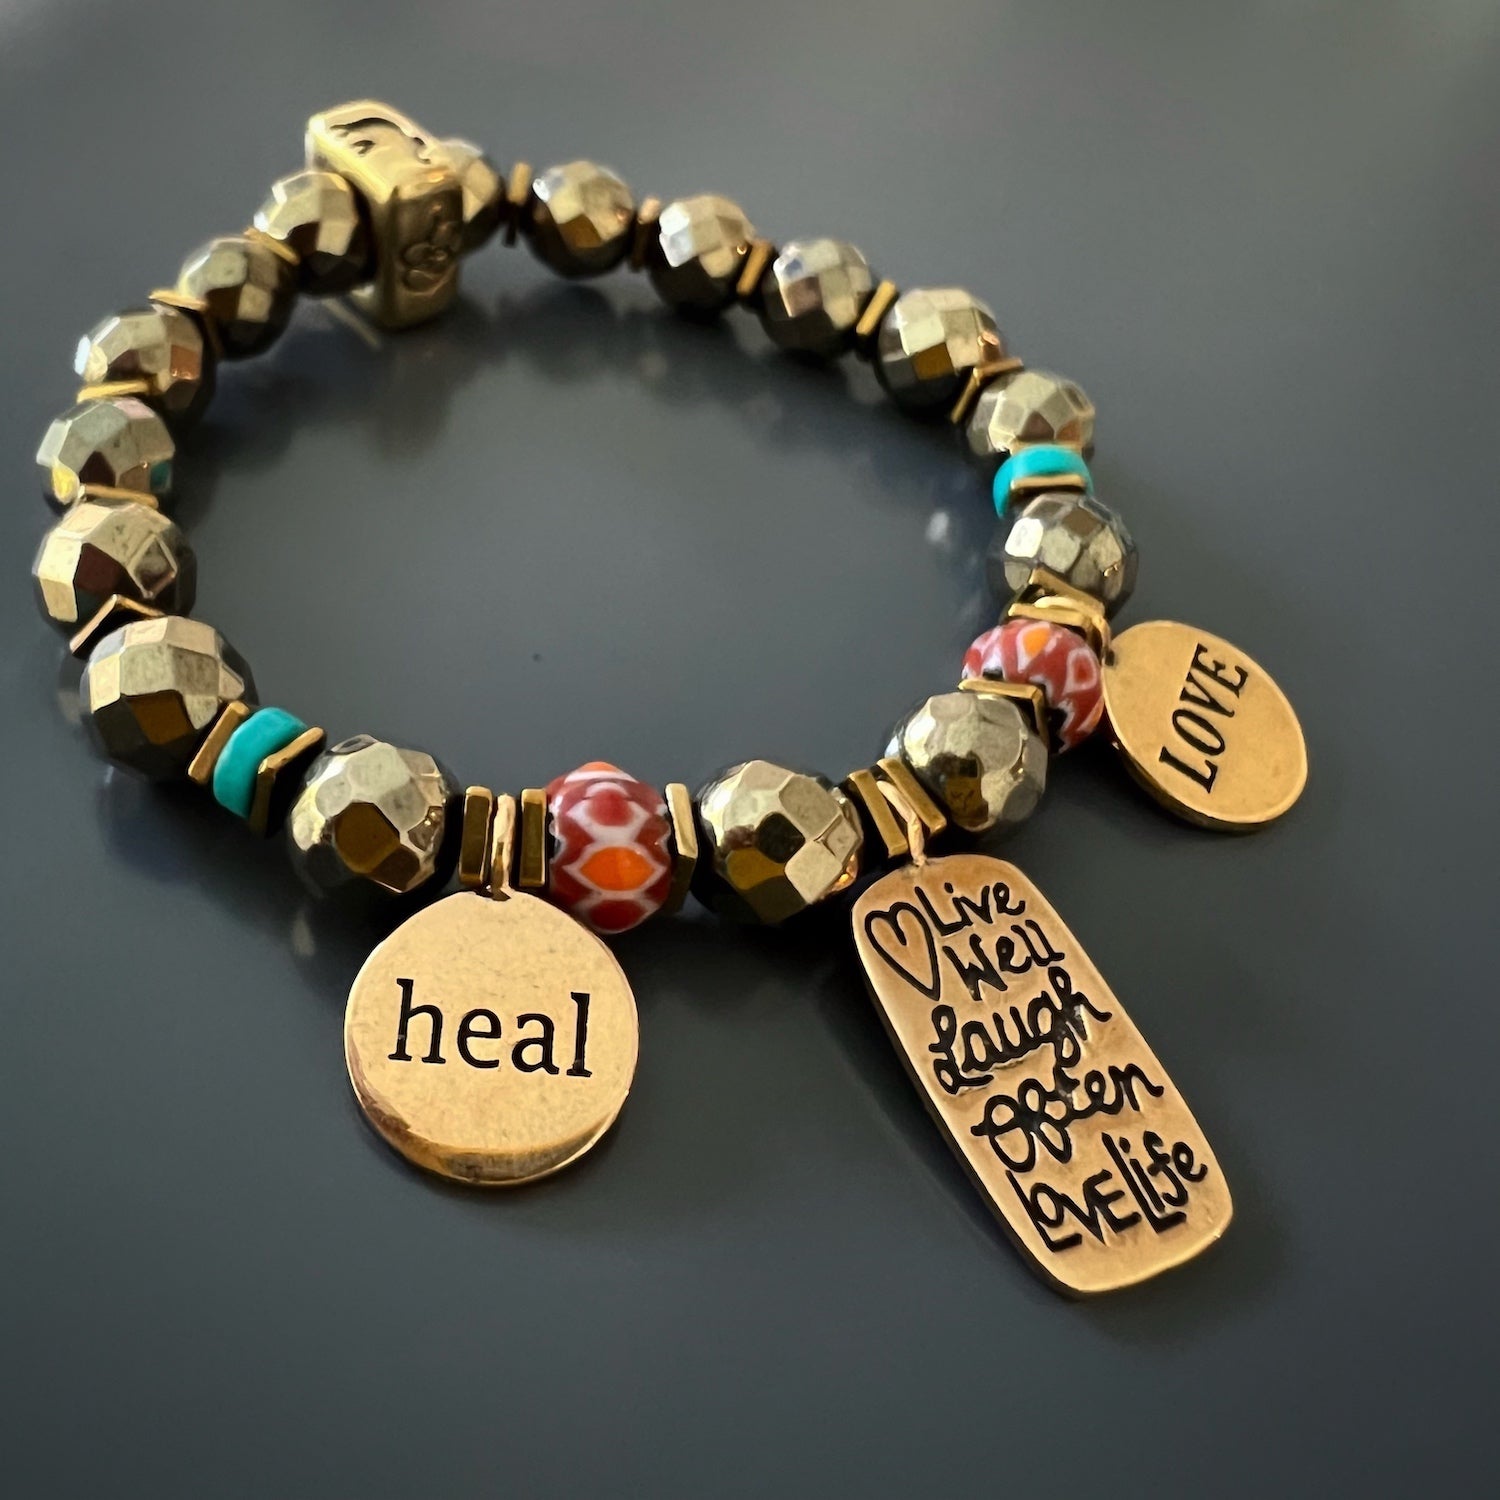 Feel the positive energy of the &quot;Love Your Life&quot; Bracelet, adorned with gold hematite beads and bronze charms with empowering messages.